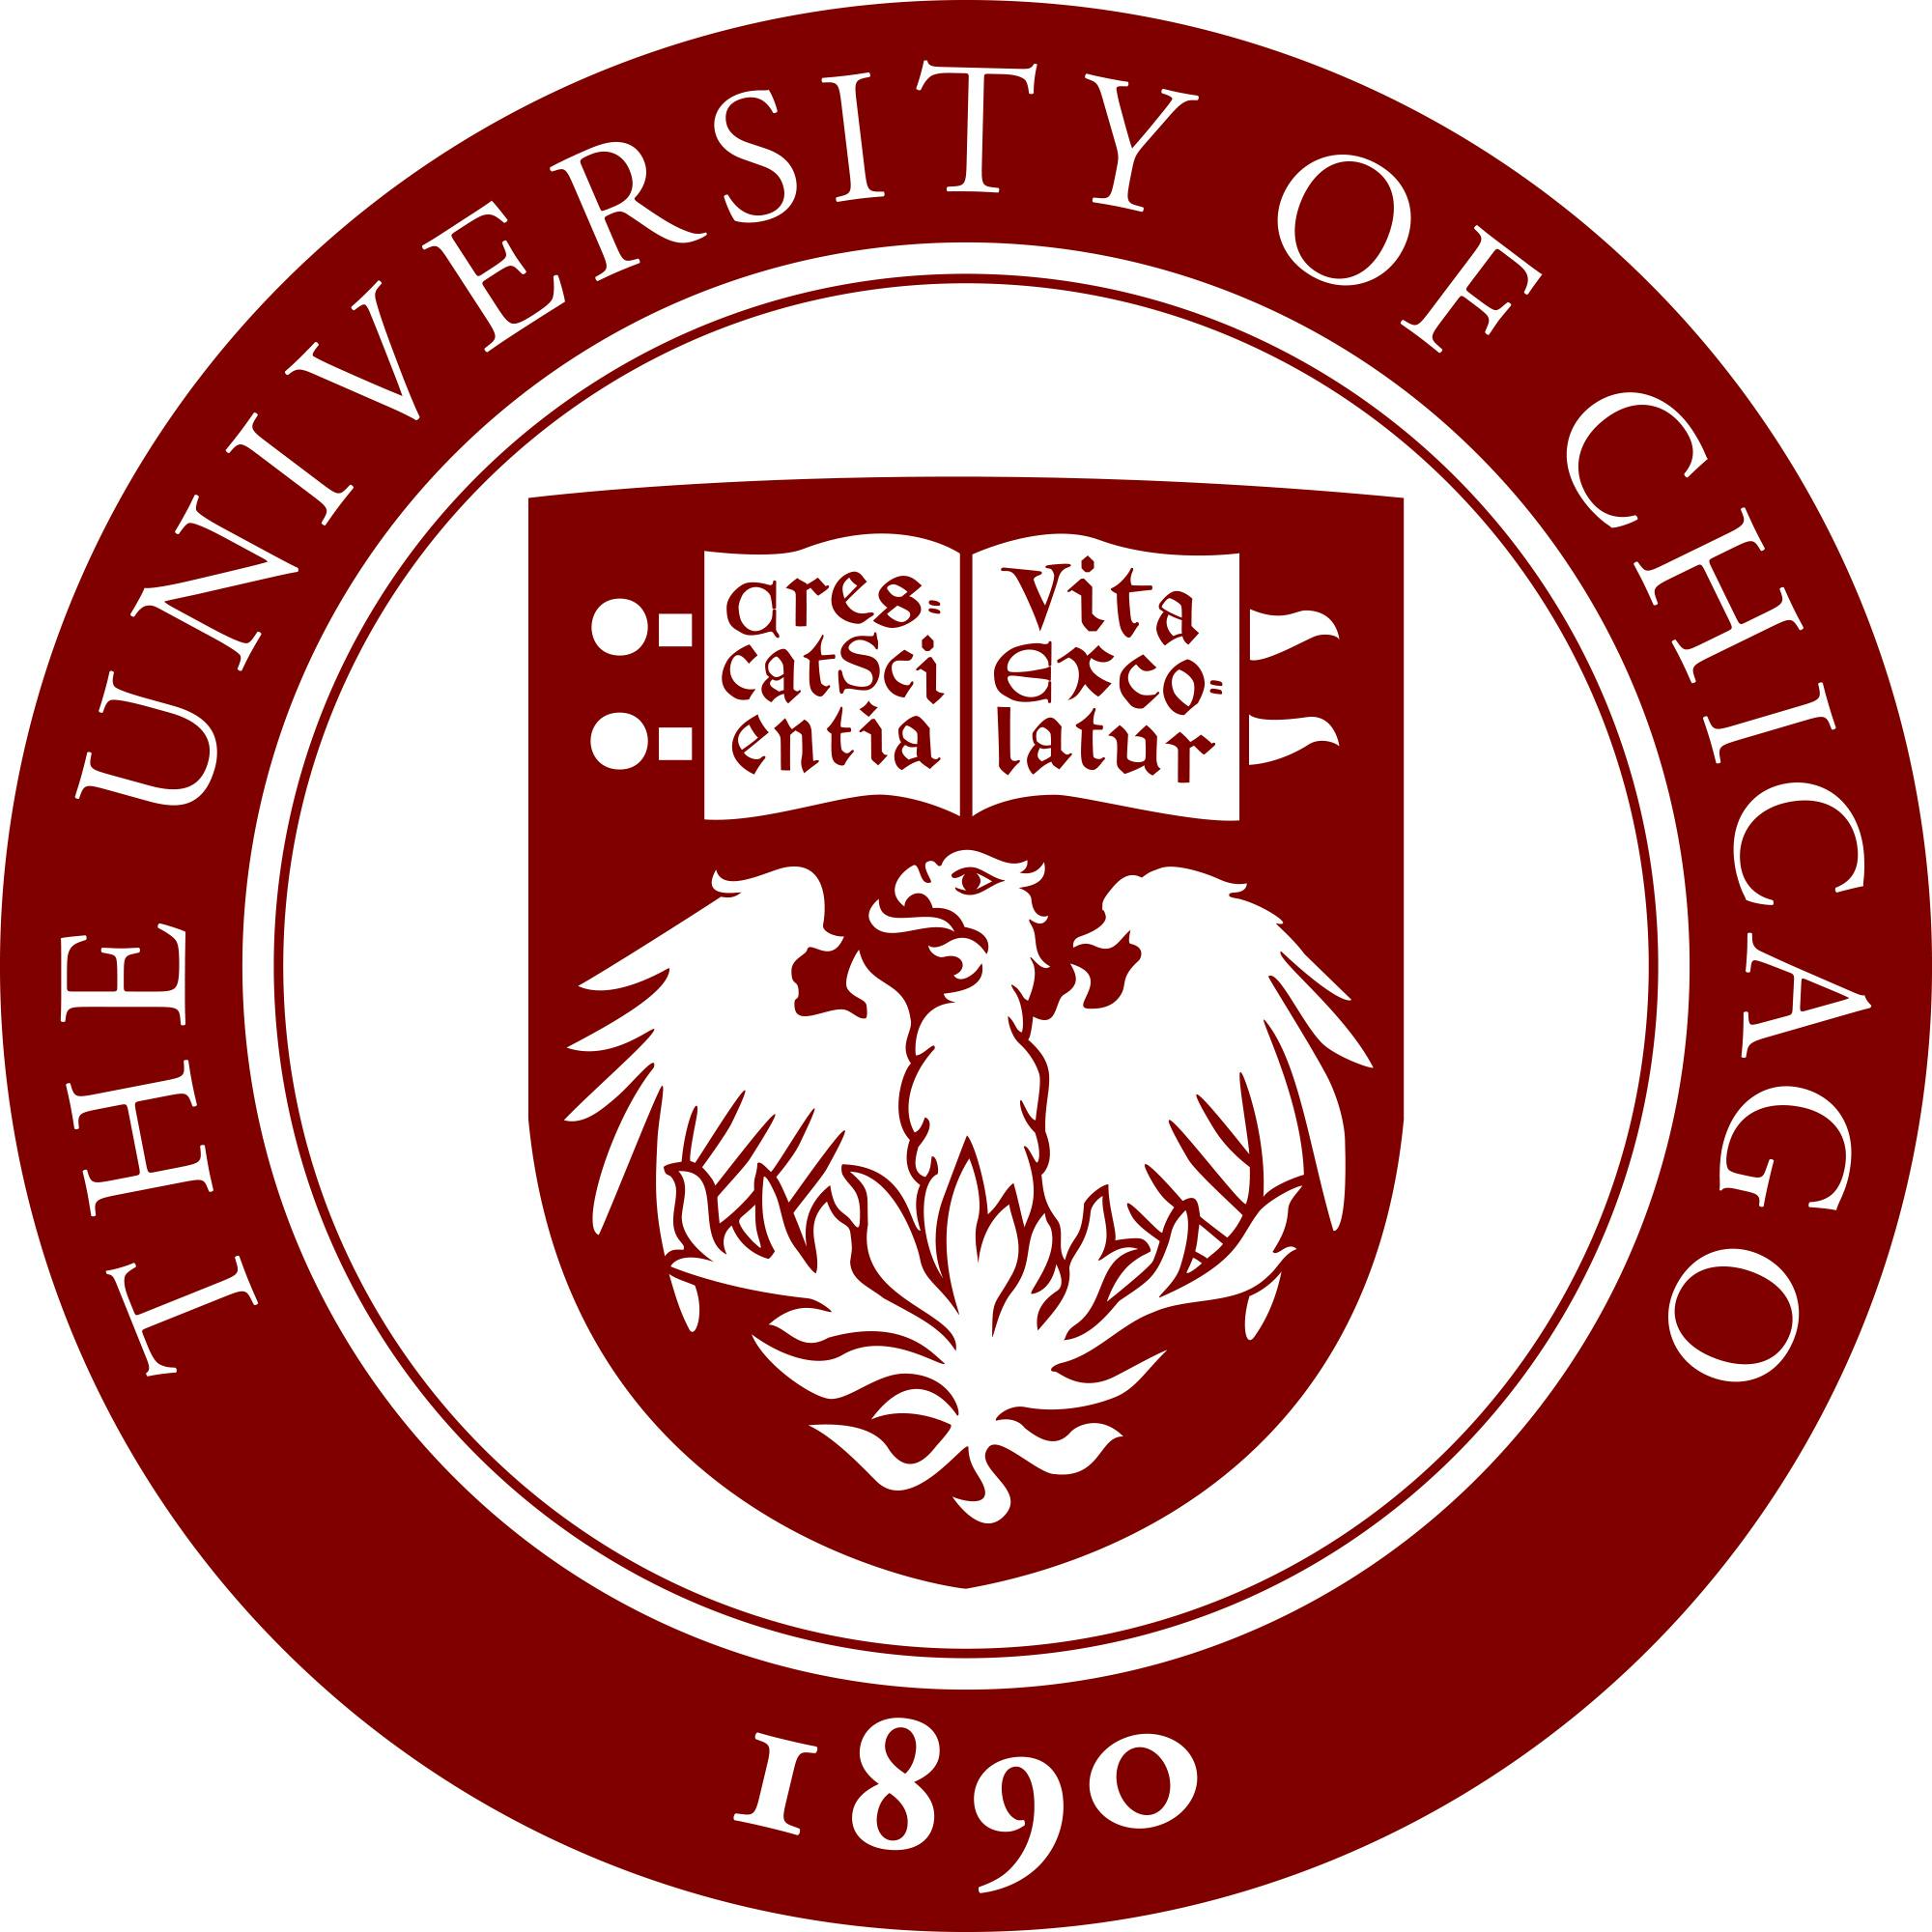 Free Digital Marketing Courses in Chicago-  UC logo